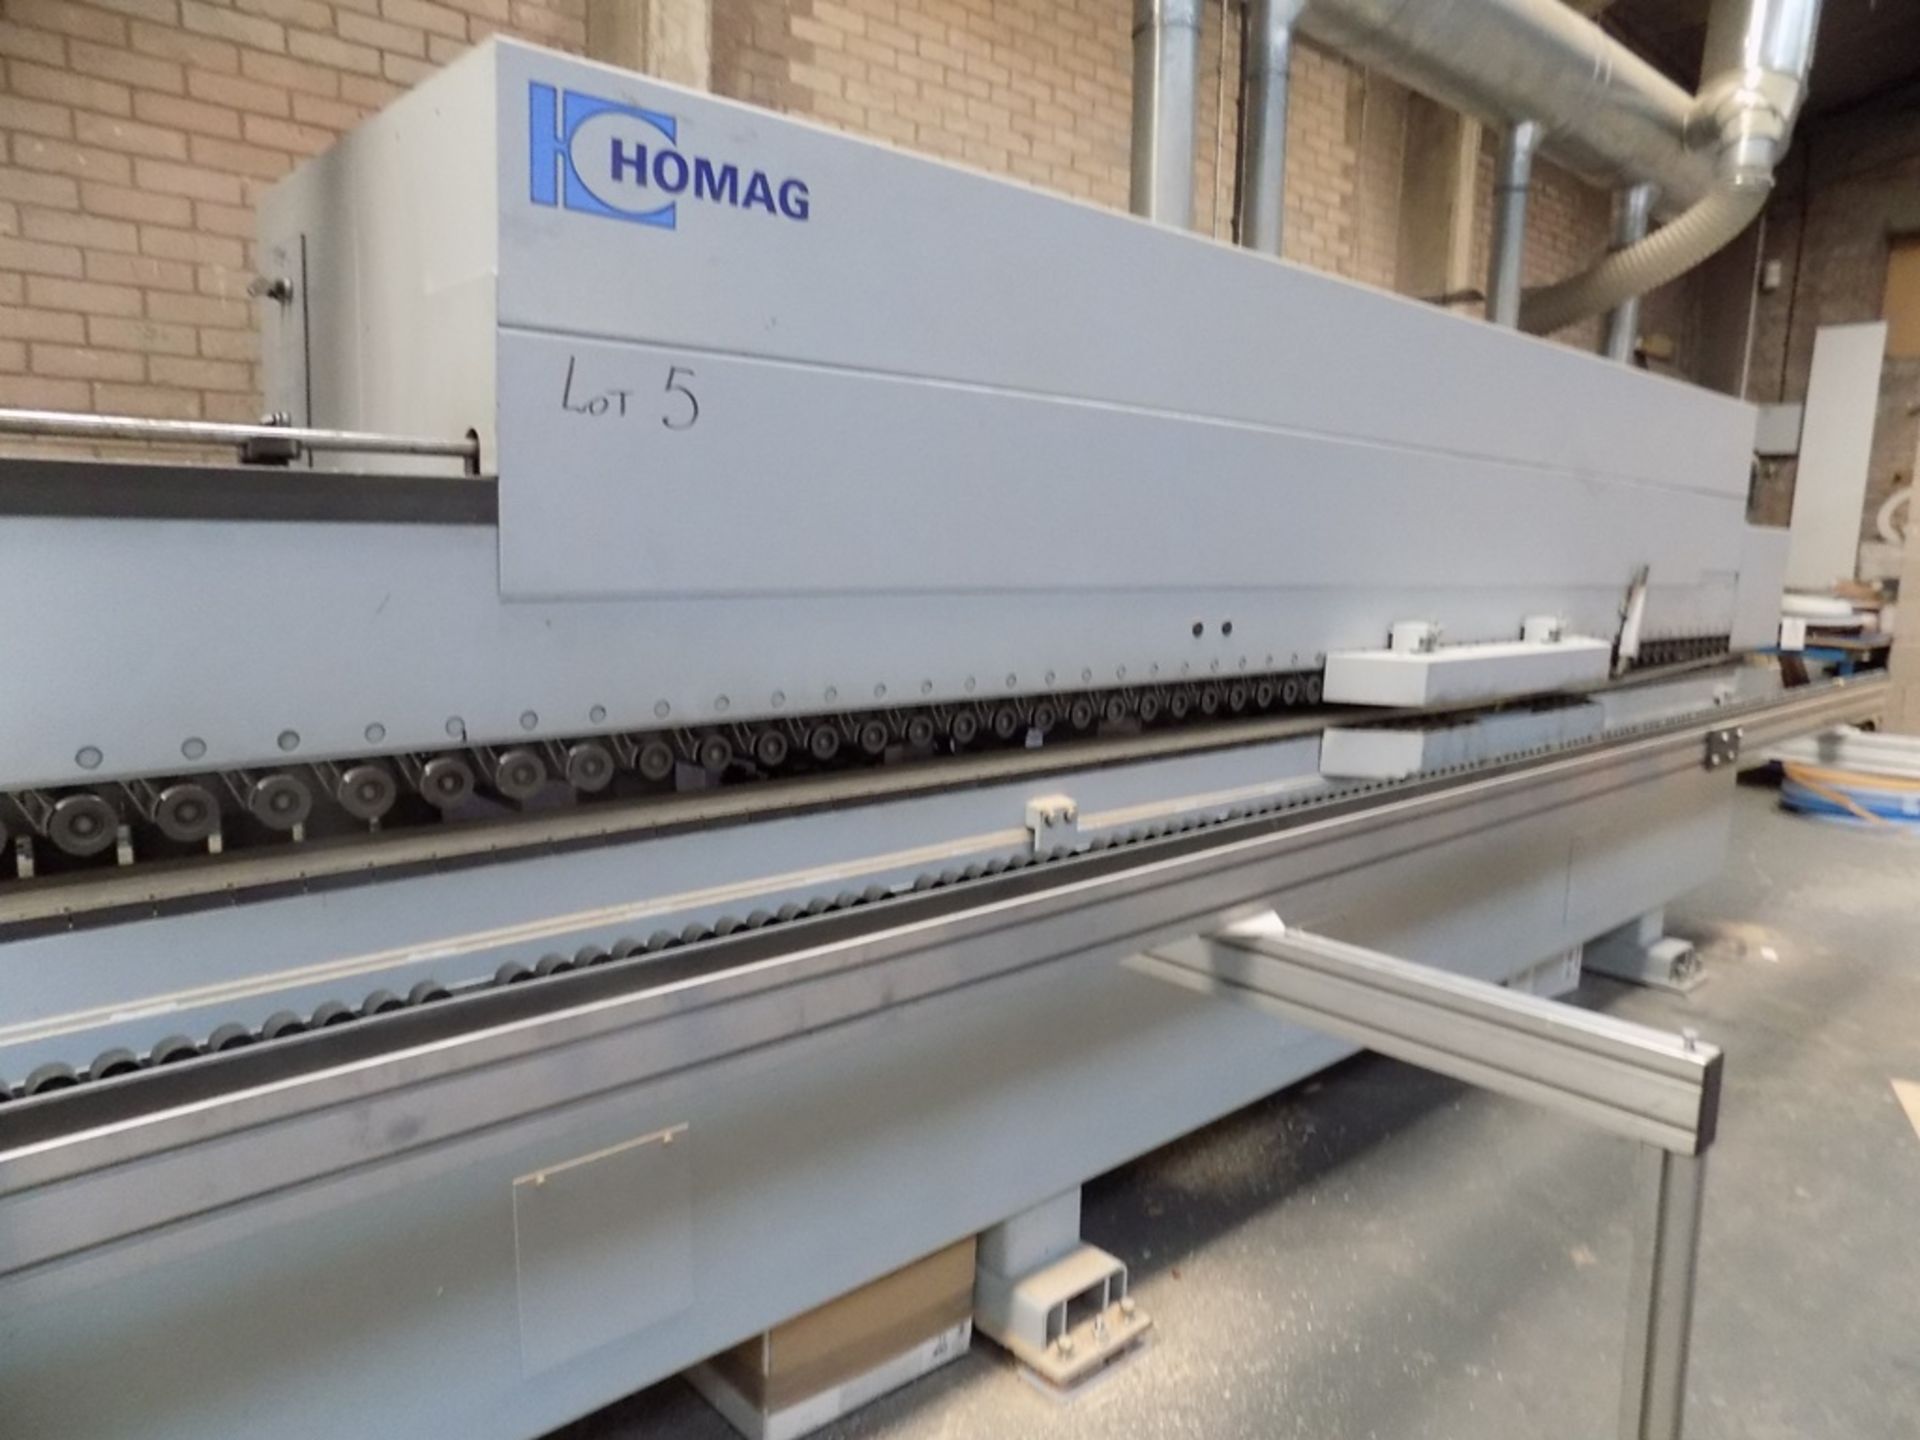 Homag Optimat KAL 210/6/A20/52 CNC single sided edge banding machine, width 7m, Serial no. 0-200- - Image 9 of 13